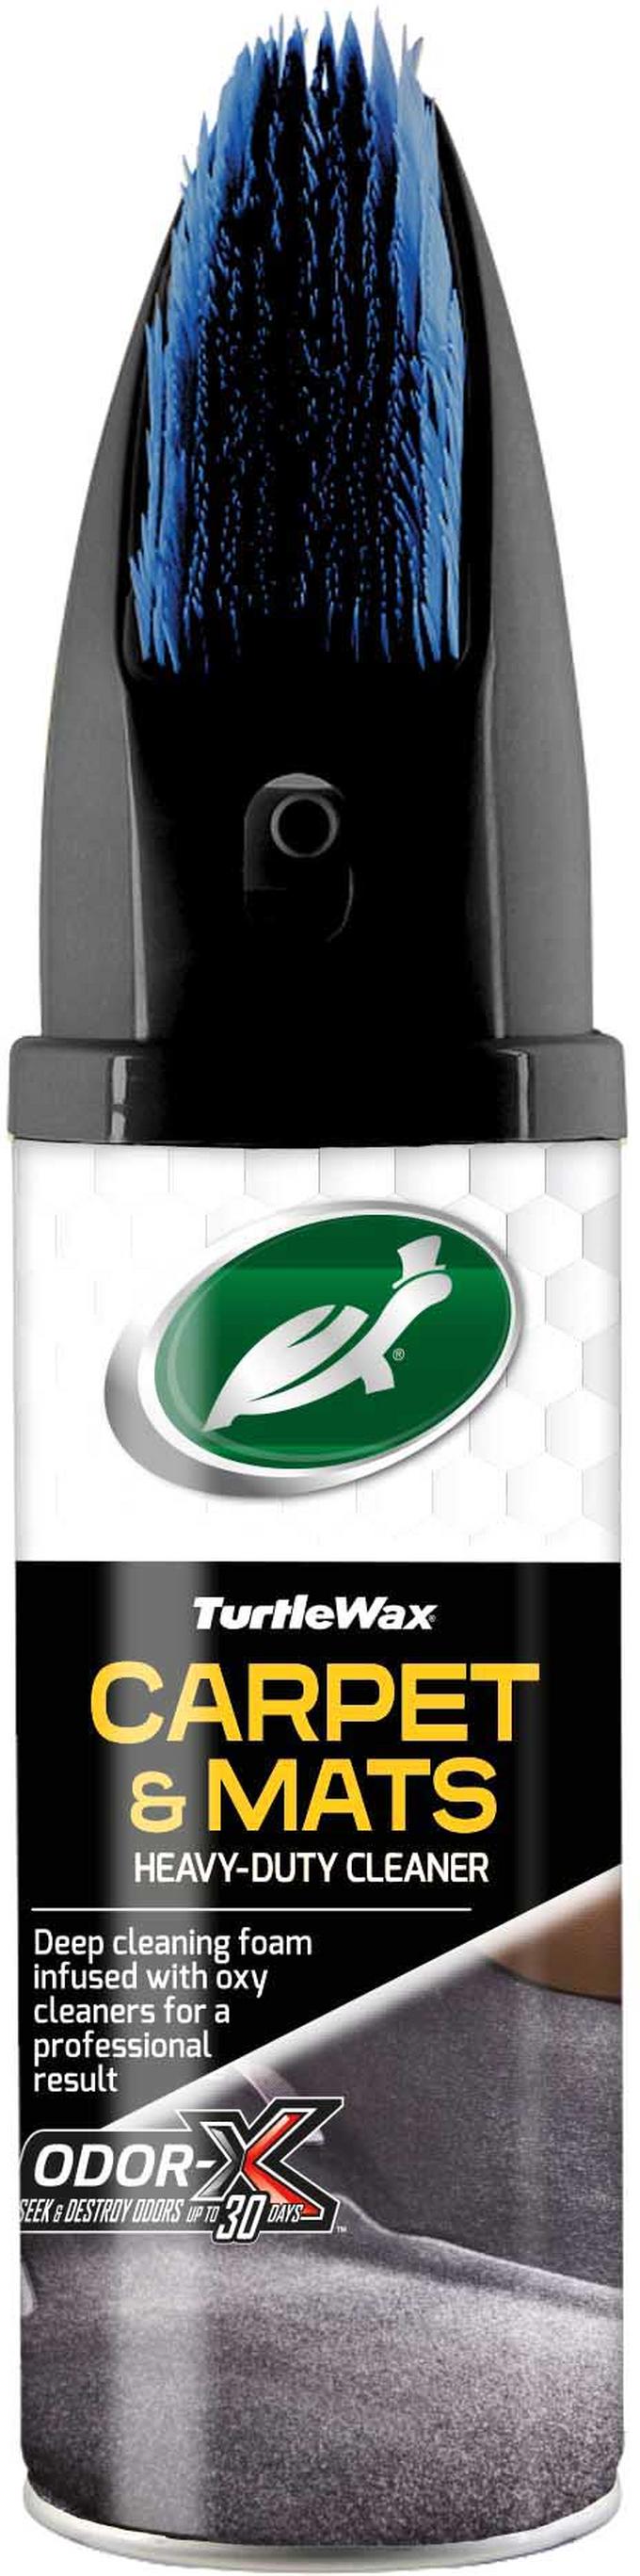 Turtle Wax Oxy Interior 1 Multi-Purpose Cleaner and Stain Remover Spray